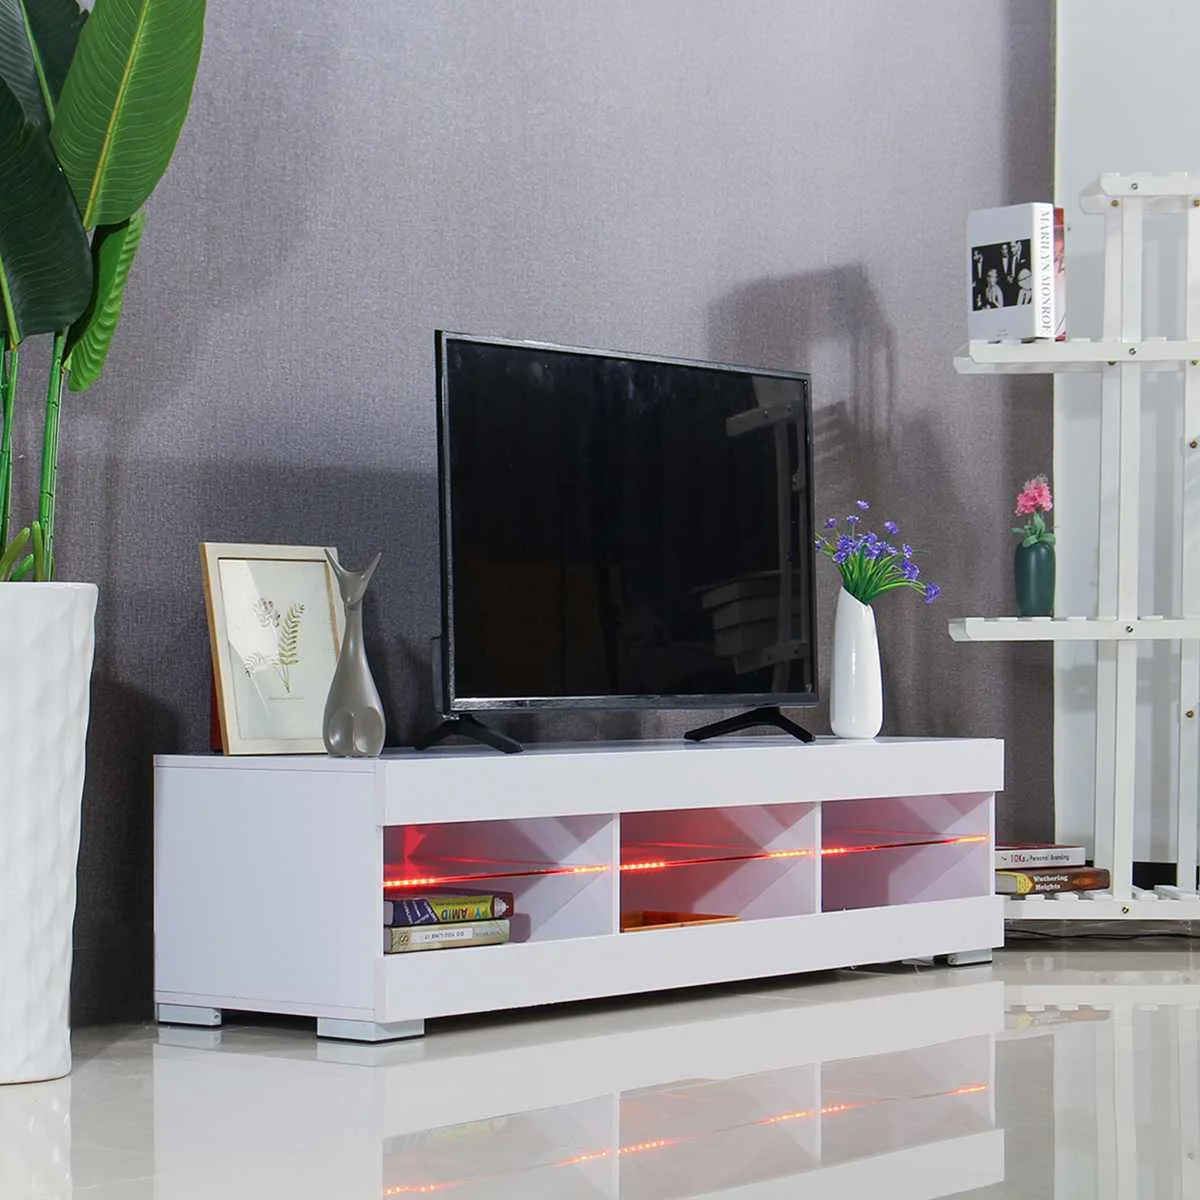 57 inch RGB LED TV Unit Cabinet Stands with 6 Open Drawers TV Bracket Table Home Living Room Furniture tv Stands US Shipping